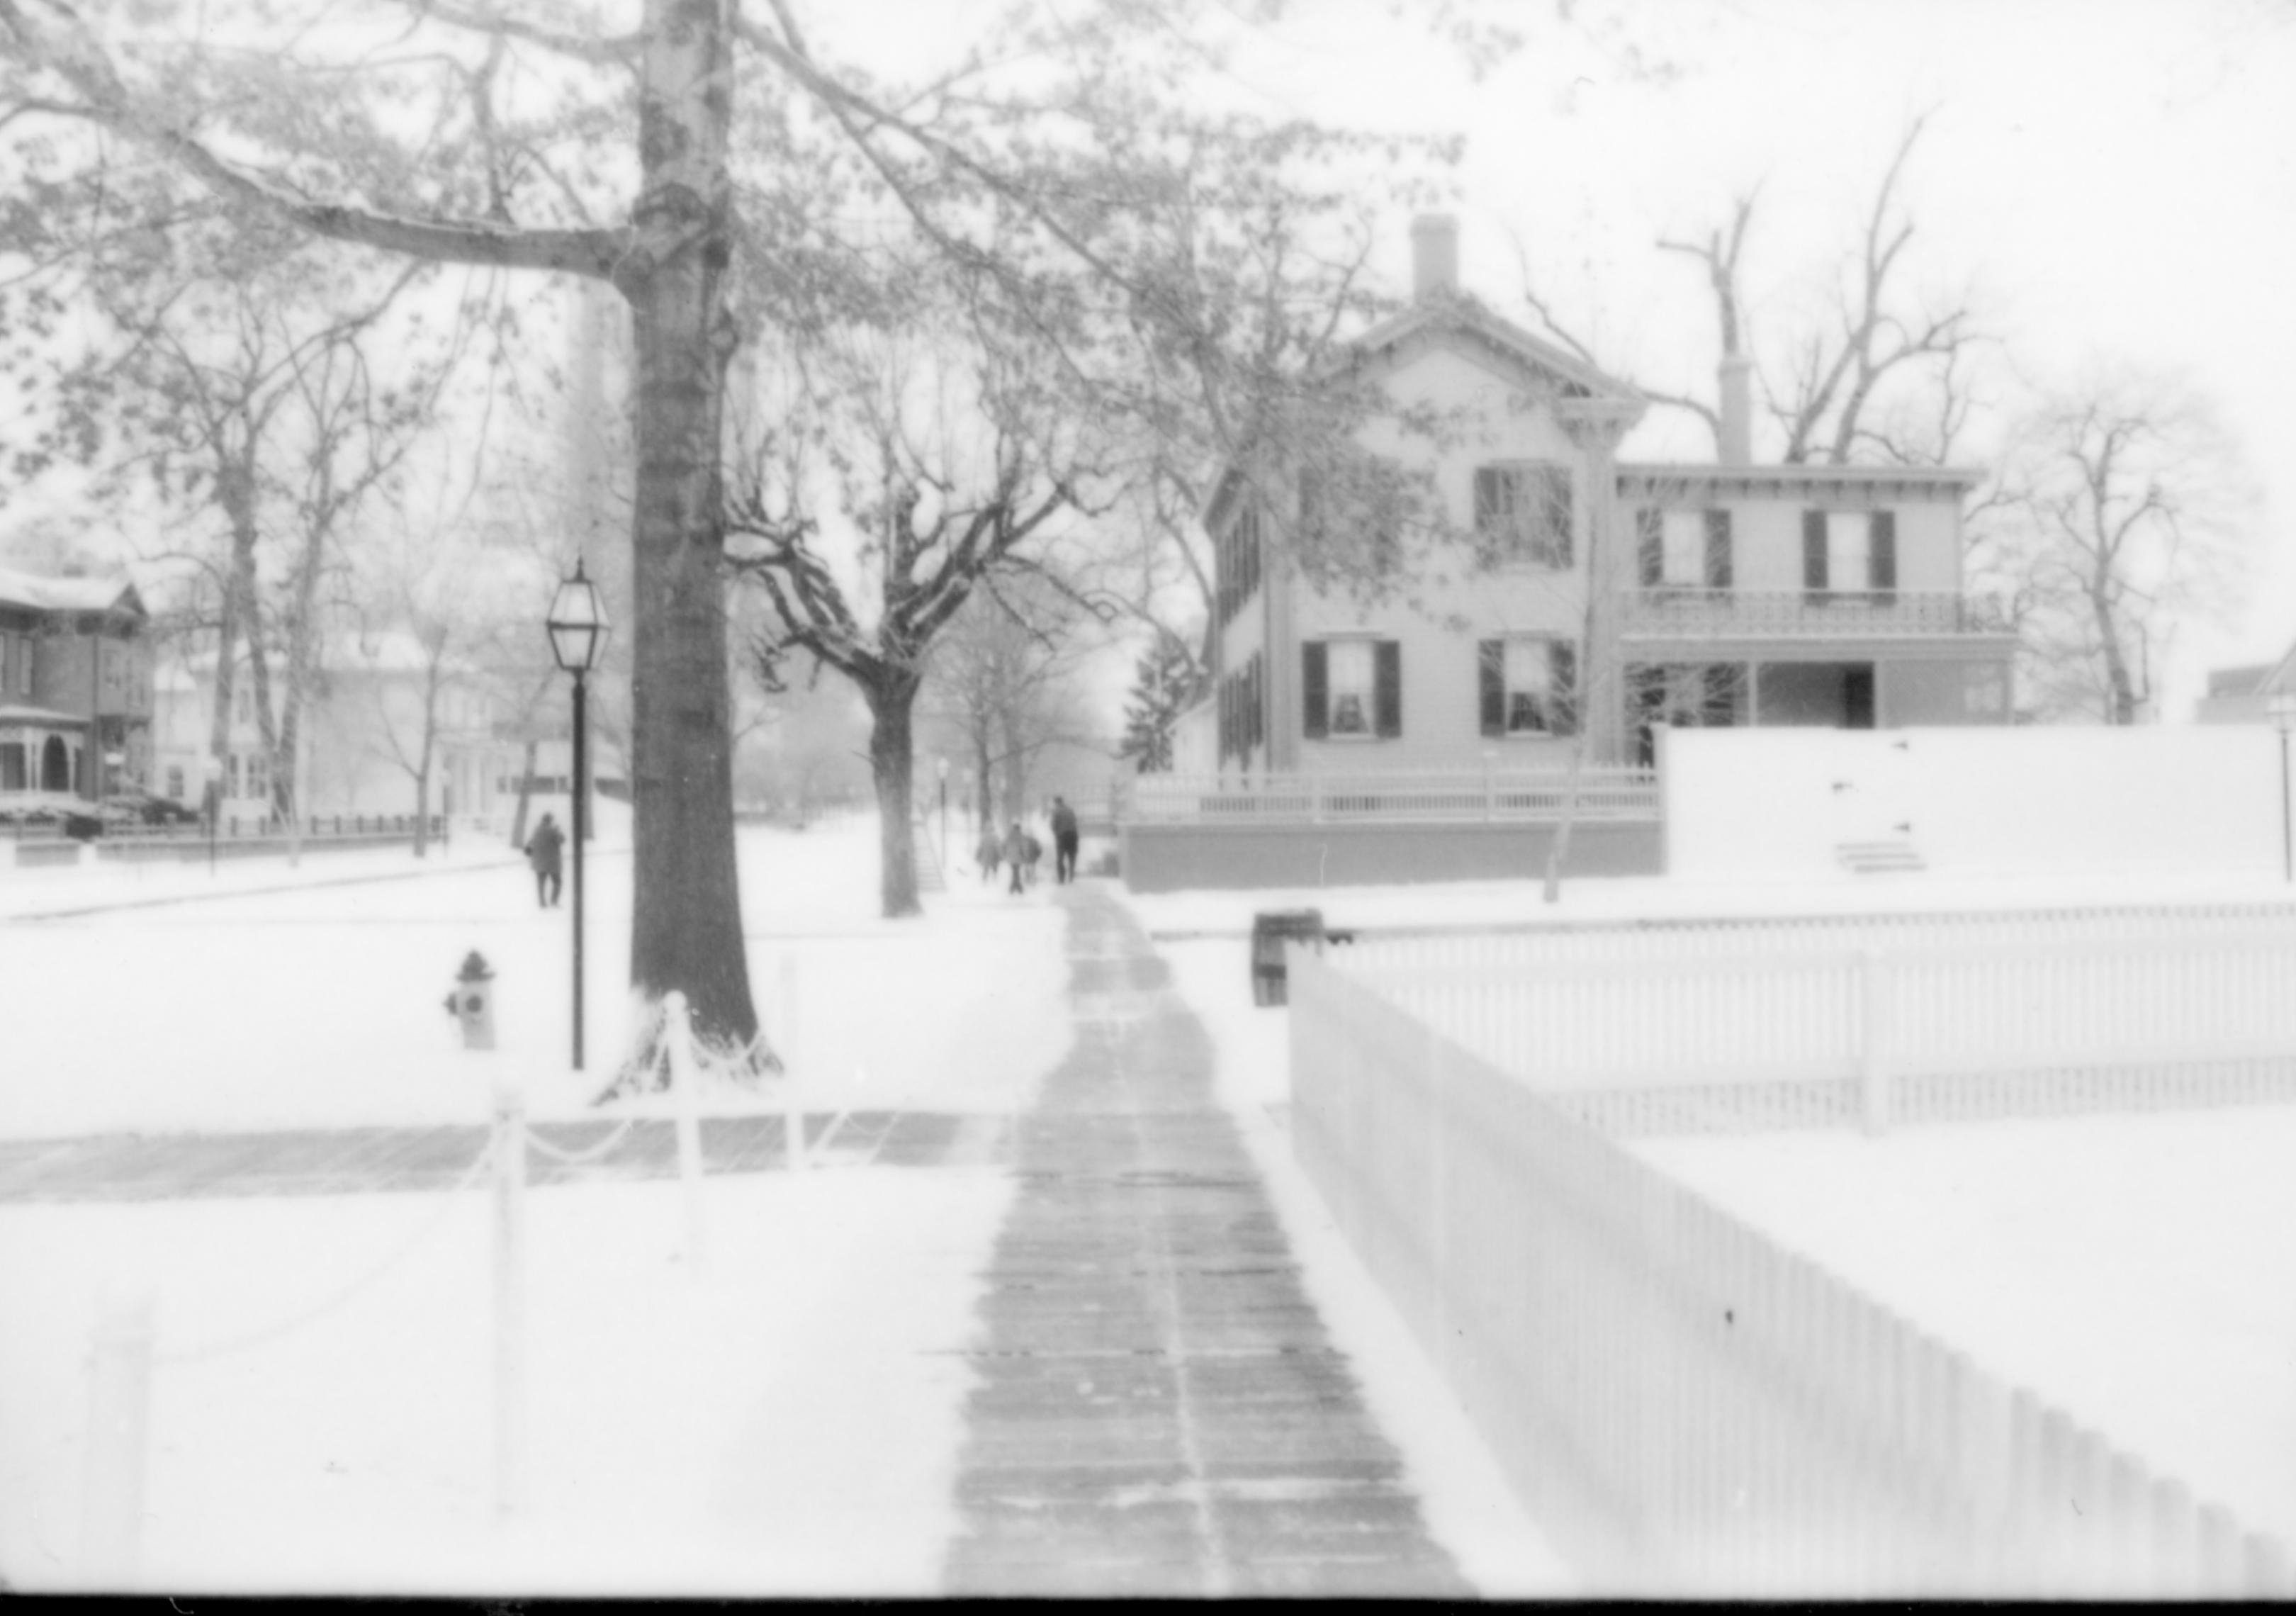 NA Lincoln Home NHS- Various locations, Buildings in Park, 104 neighborhood, historical, snow